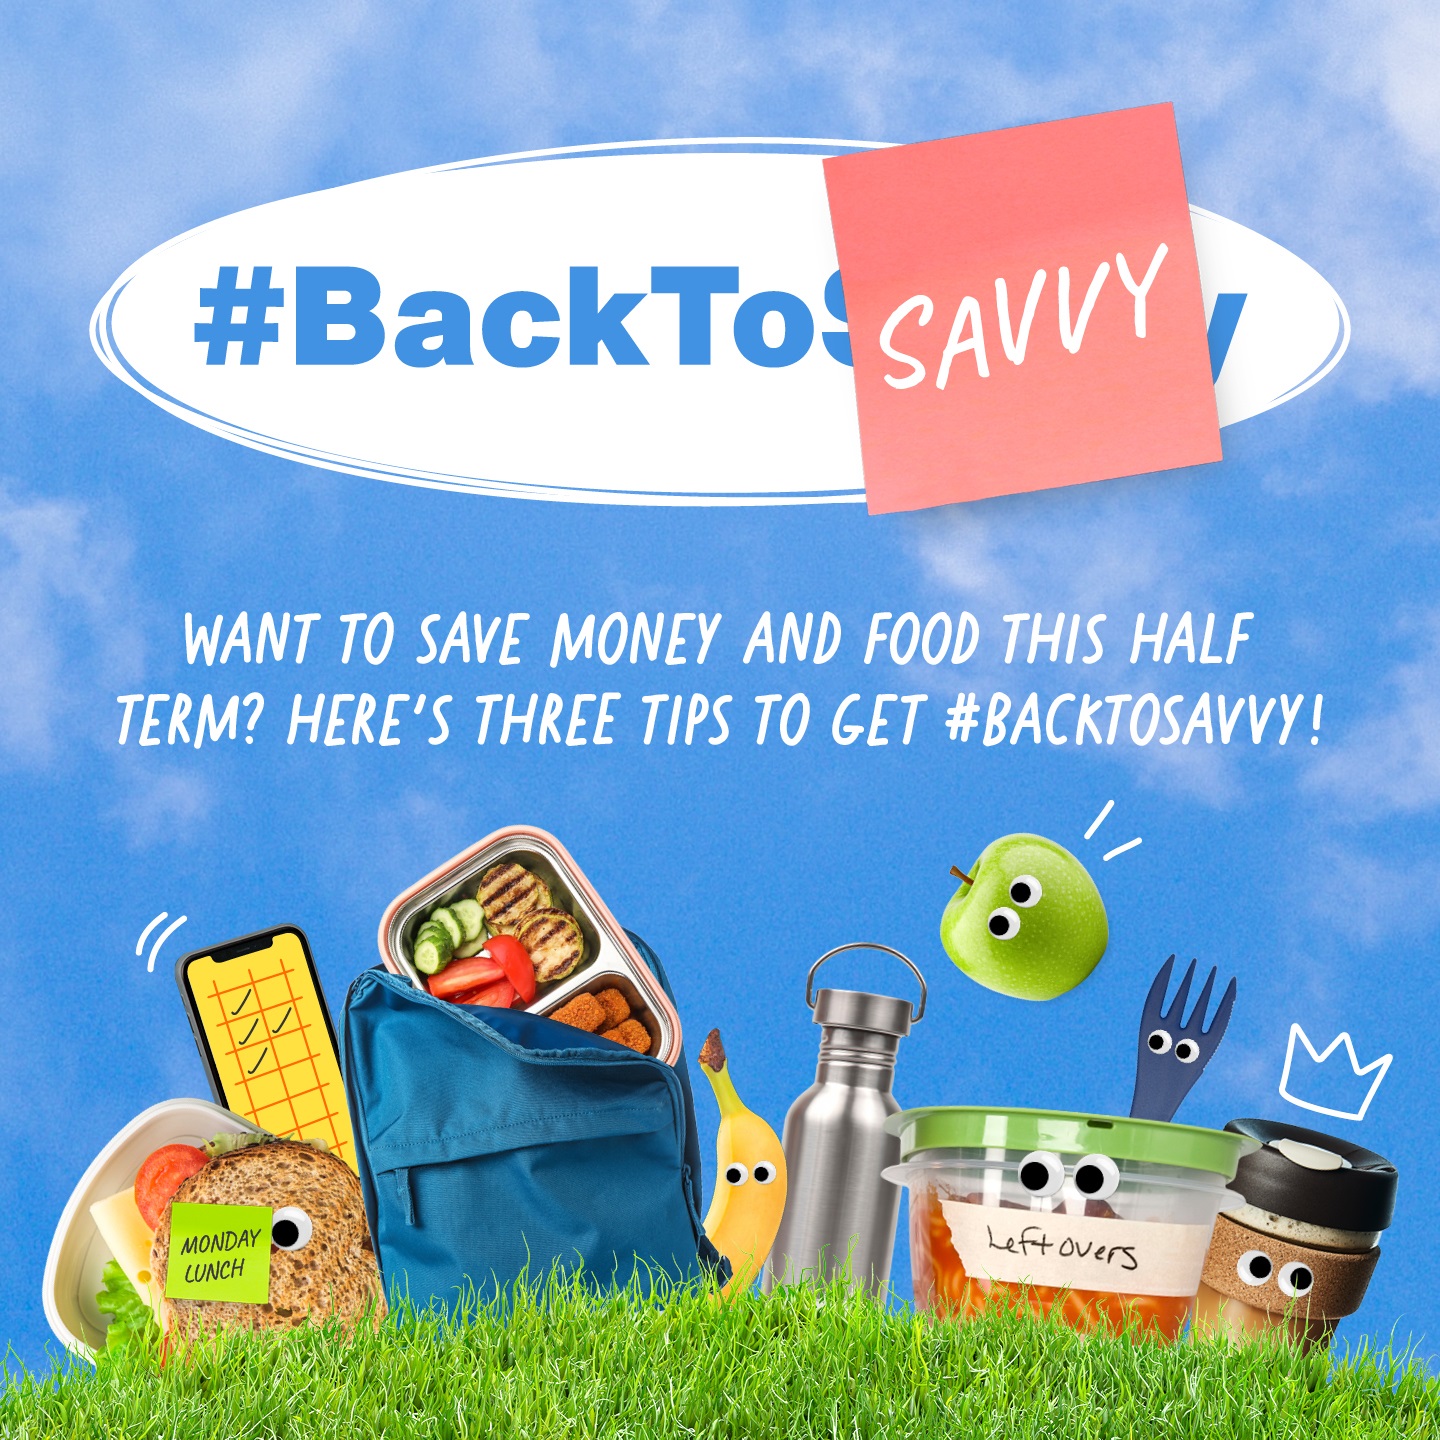 Kitchen utensils and food items across the foot of the image. Across the top are the words #BackToSavvy. Underneath are the words "want to save money and food this half term? here's three tips to get #backtosavvy"